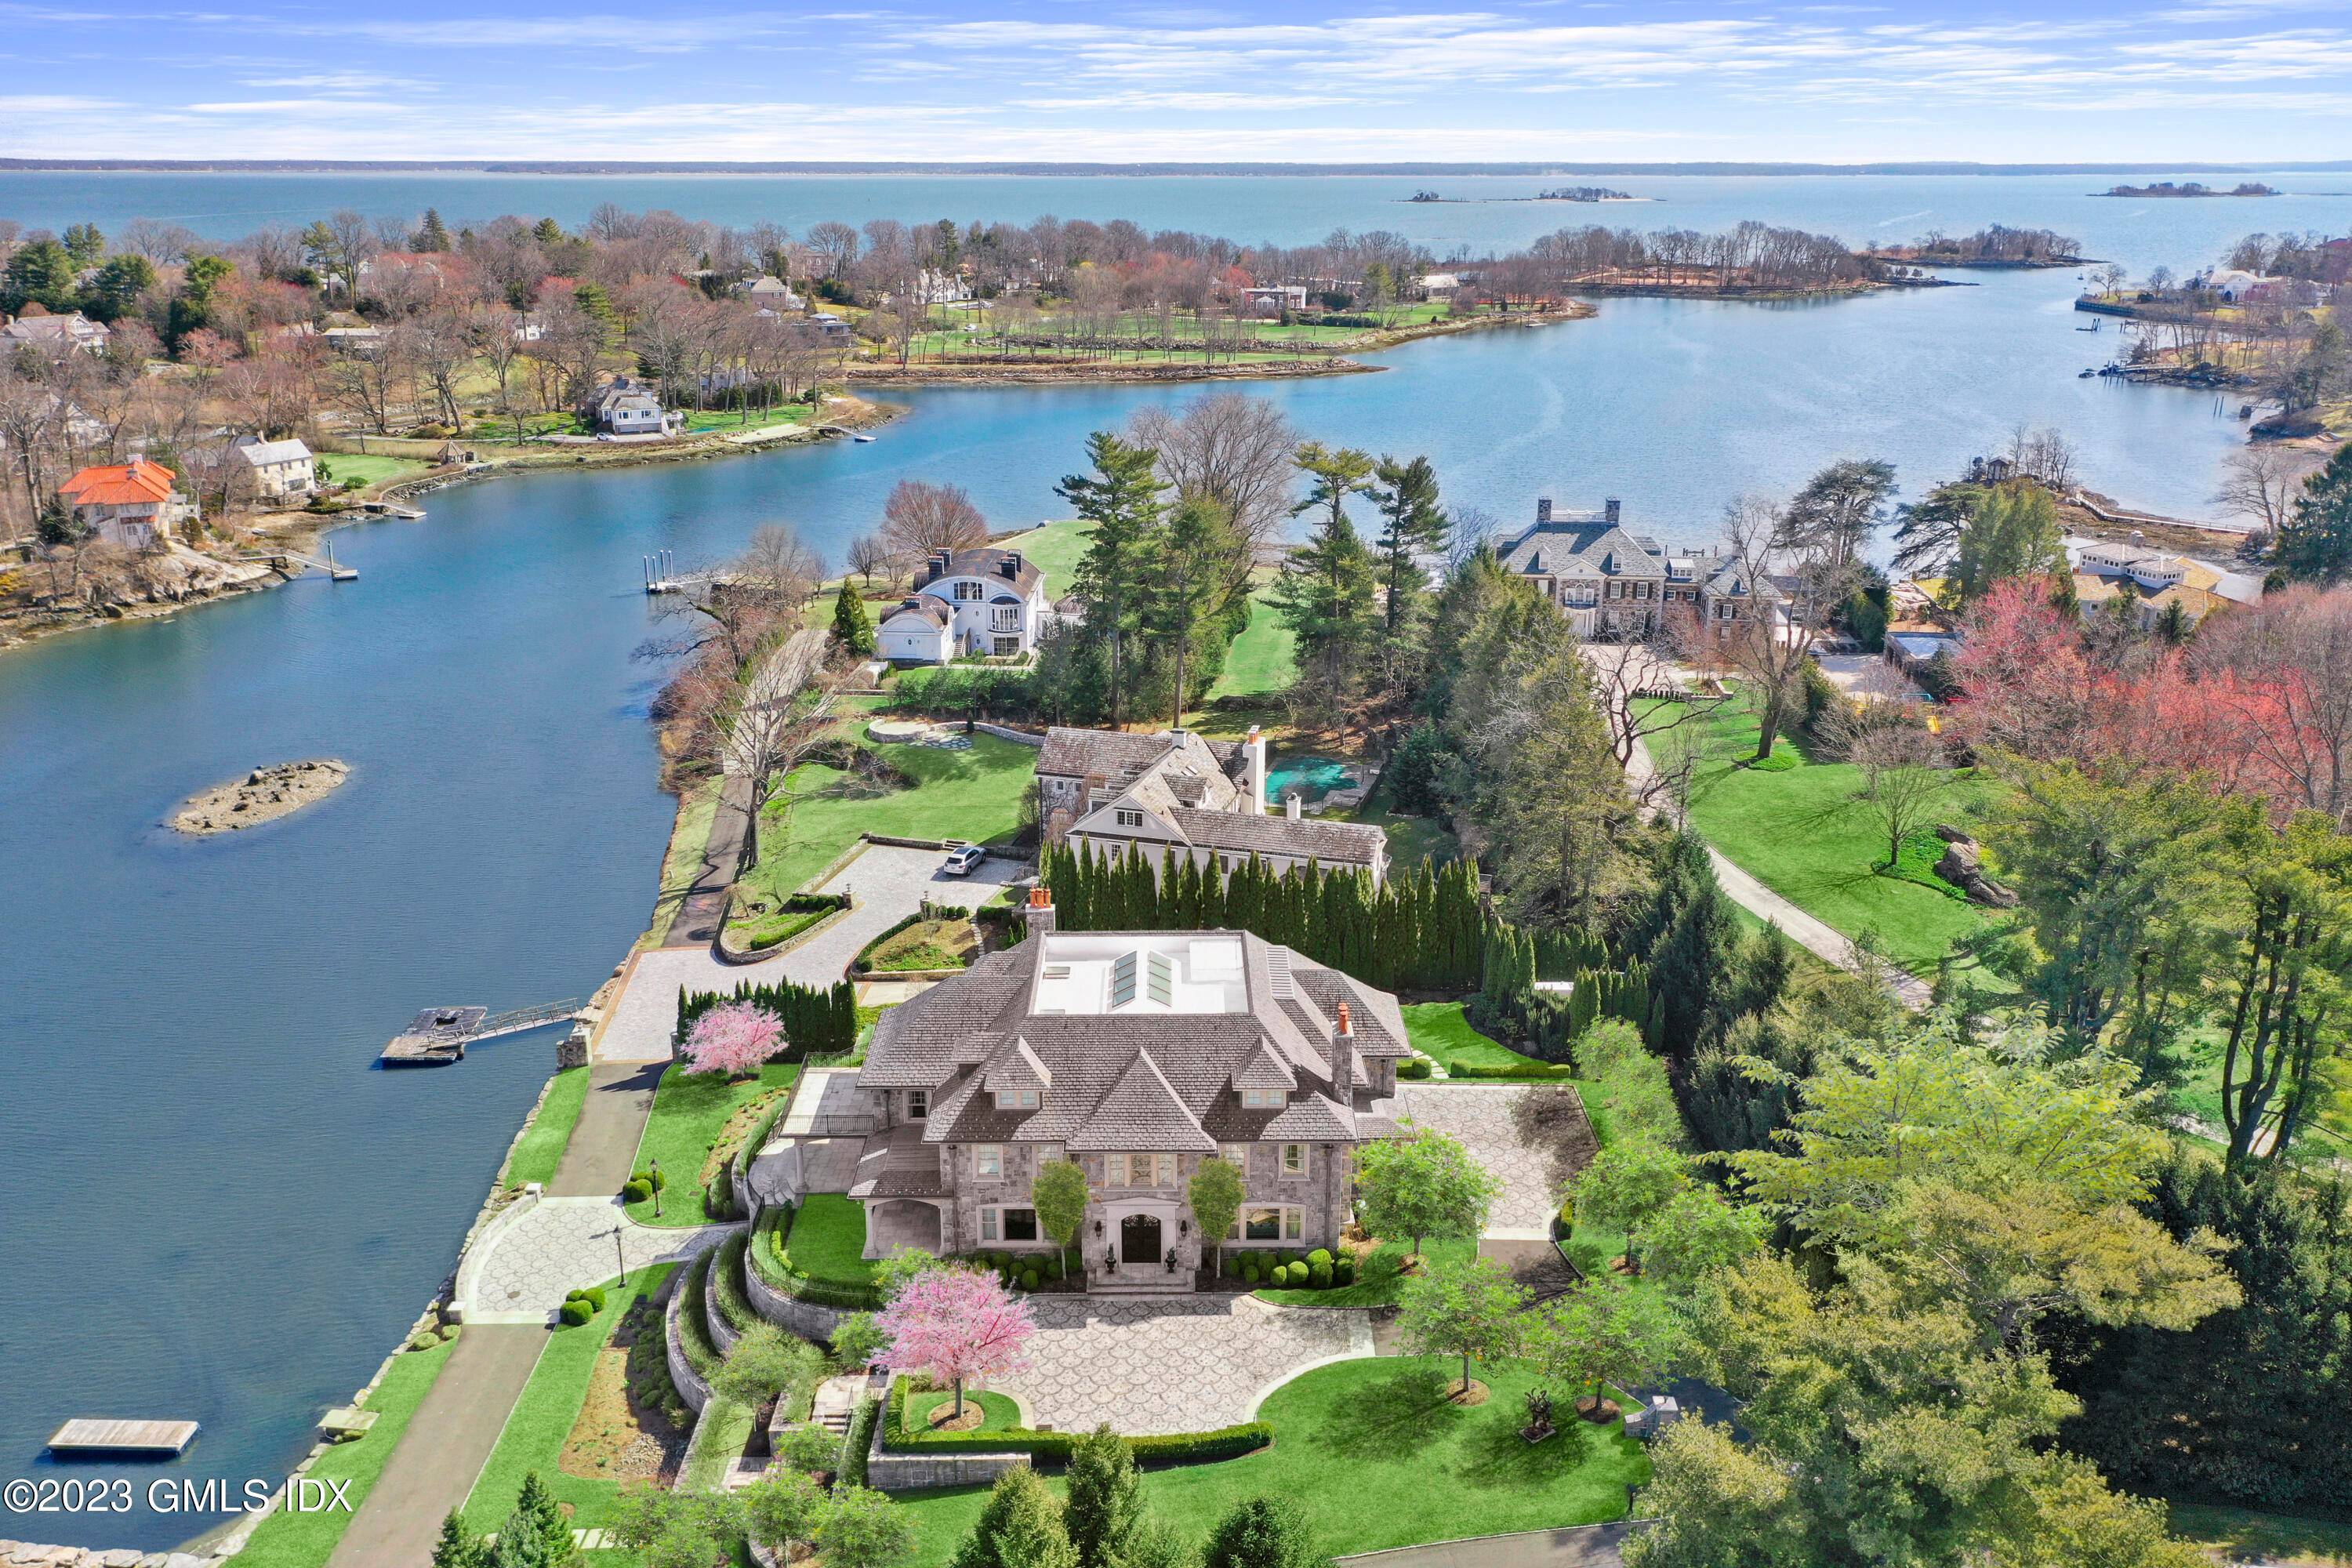 Indulge in the epitome of luxurious living with this exquisite custom built waterfront home, designed by the renowned Ridberg Associates, nestled within the prestigious and secure Indian Harbor Association.